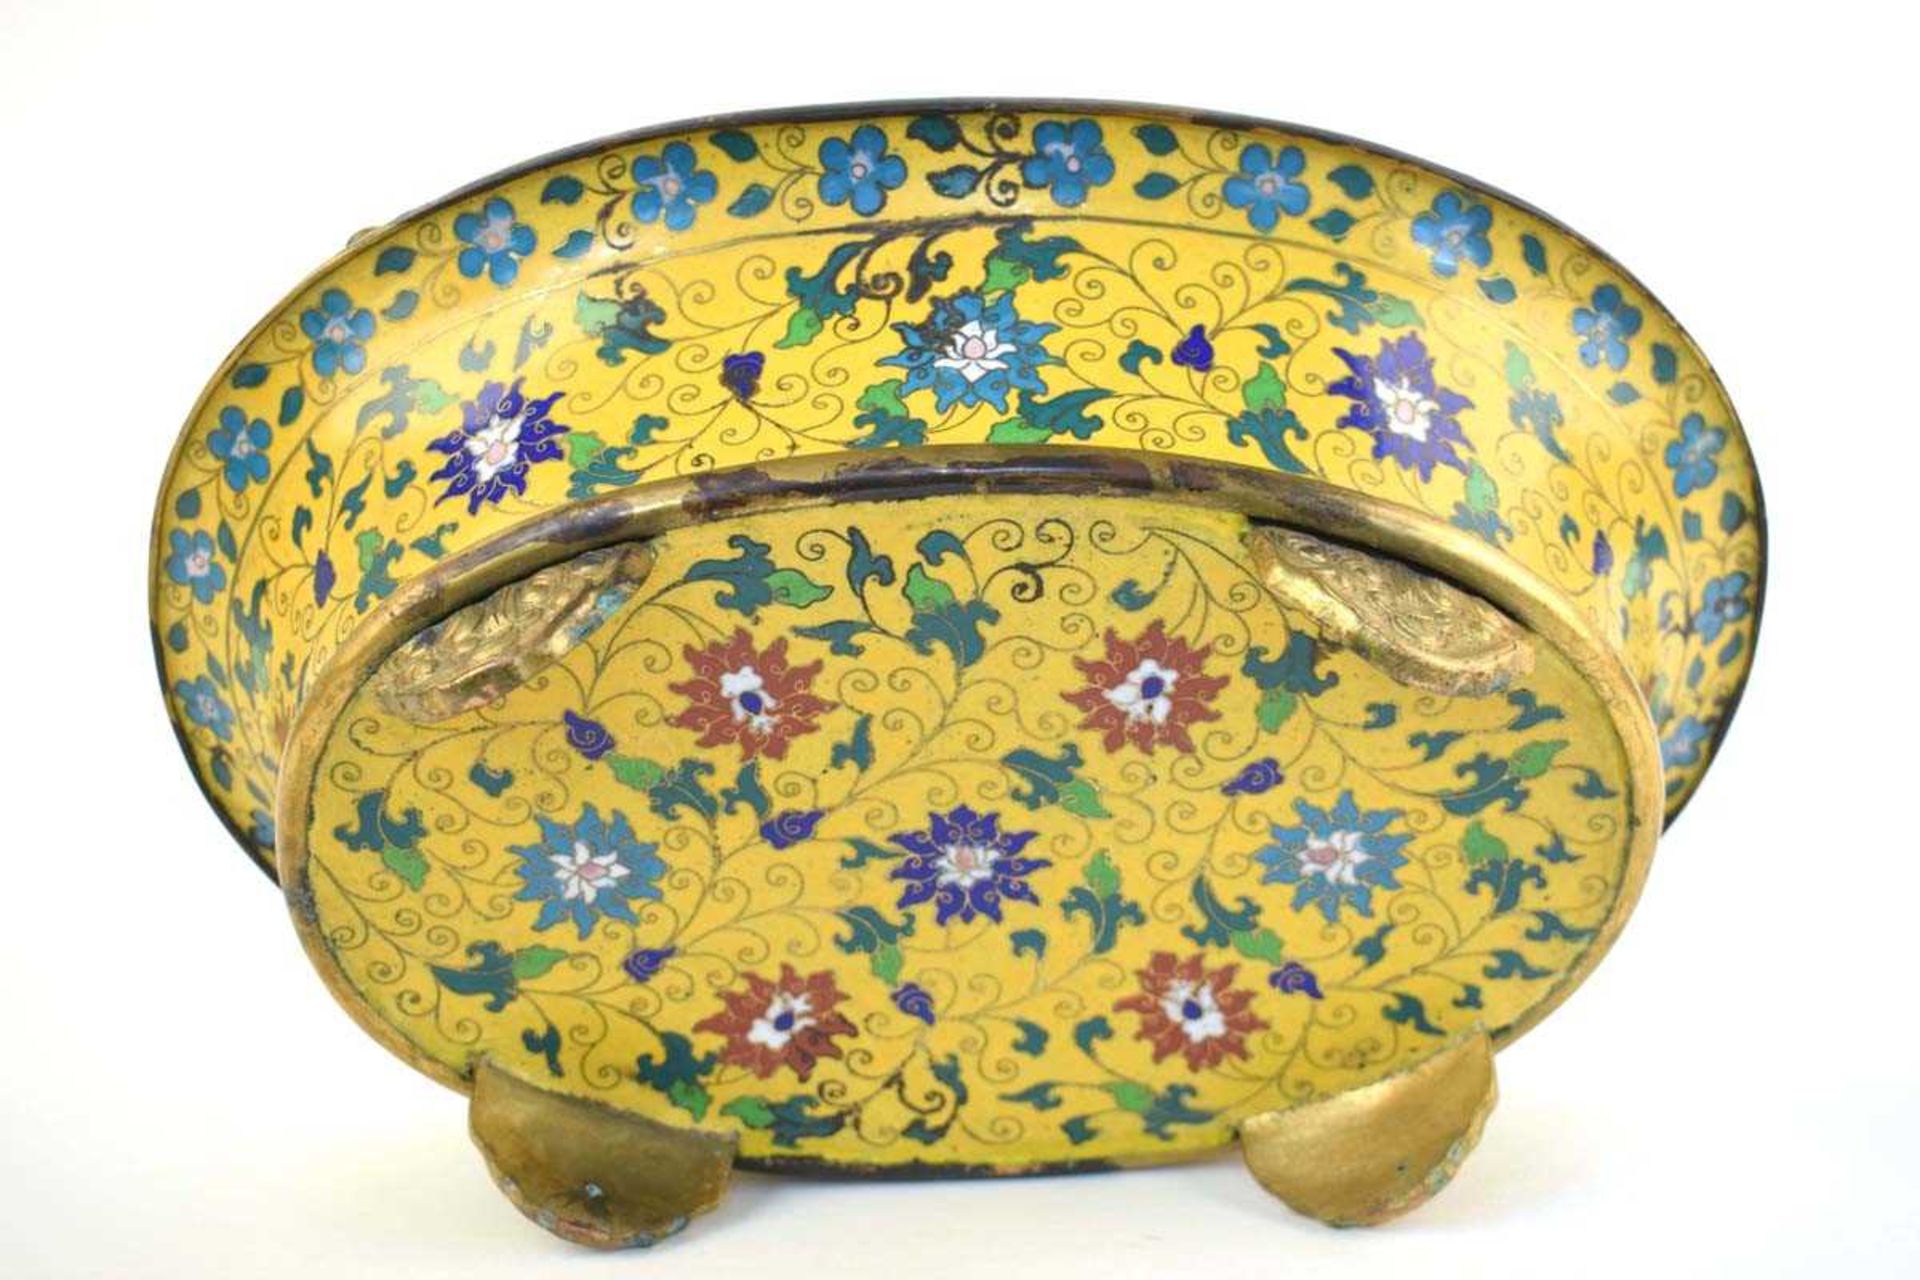 A 19th century Chinese cloisonné jardinière of oval form, decorated with floral motifs within a - Image 5 of 19